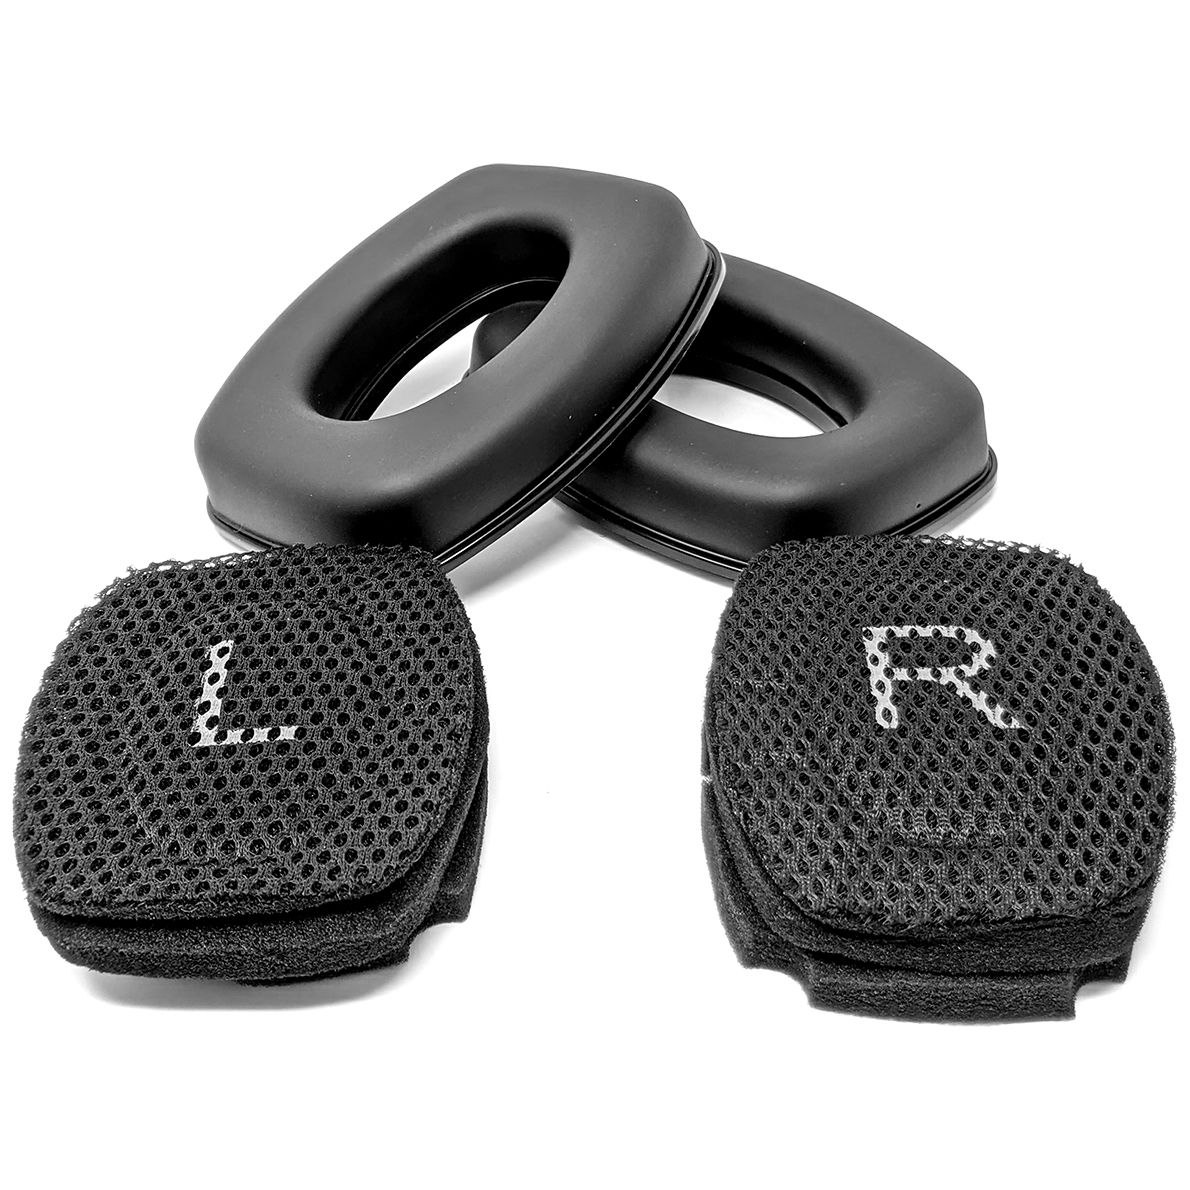 1 pair of IT-83 replacement pads for ISOtunes Defy / Link / Link Aware earmuffs - hygiene pads for IT-31/IT-32/IT-35